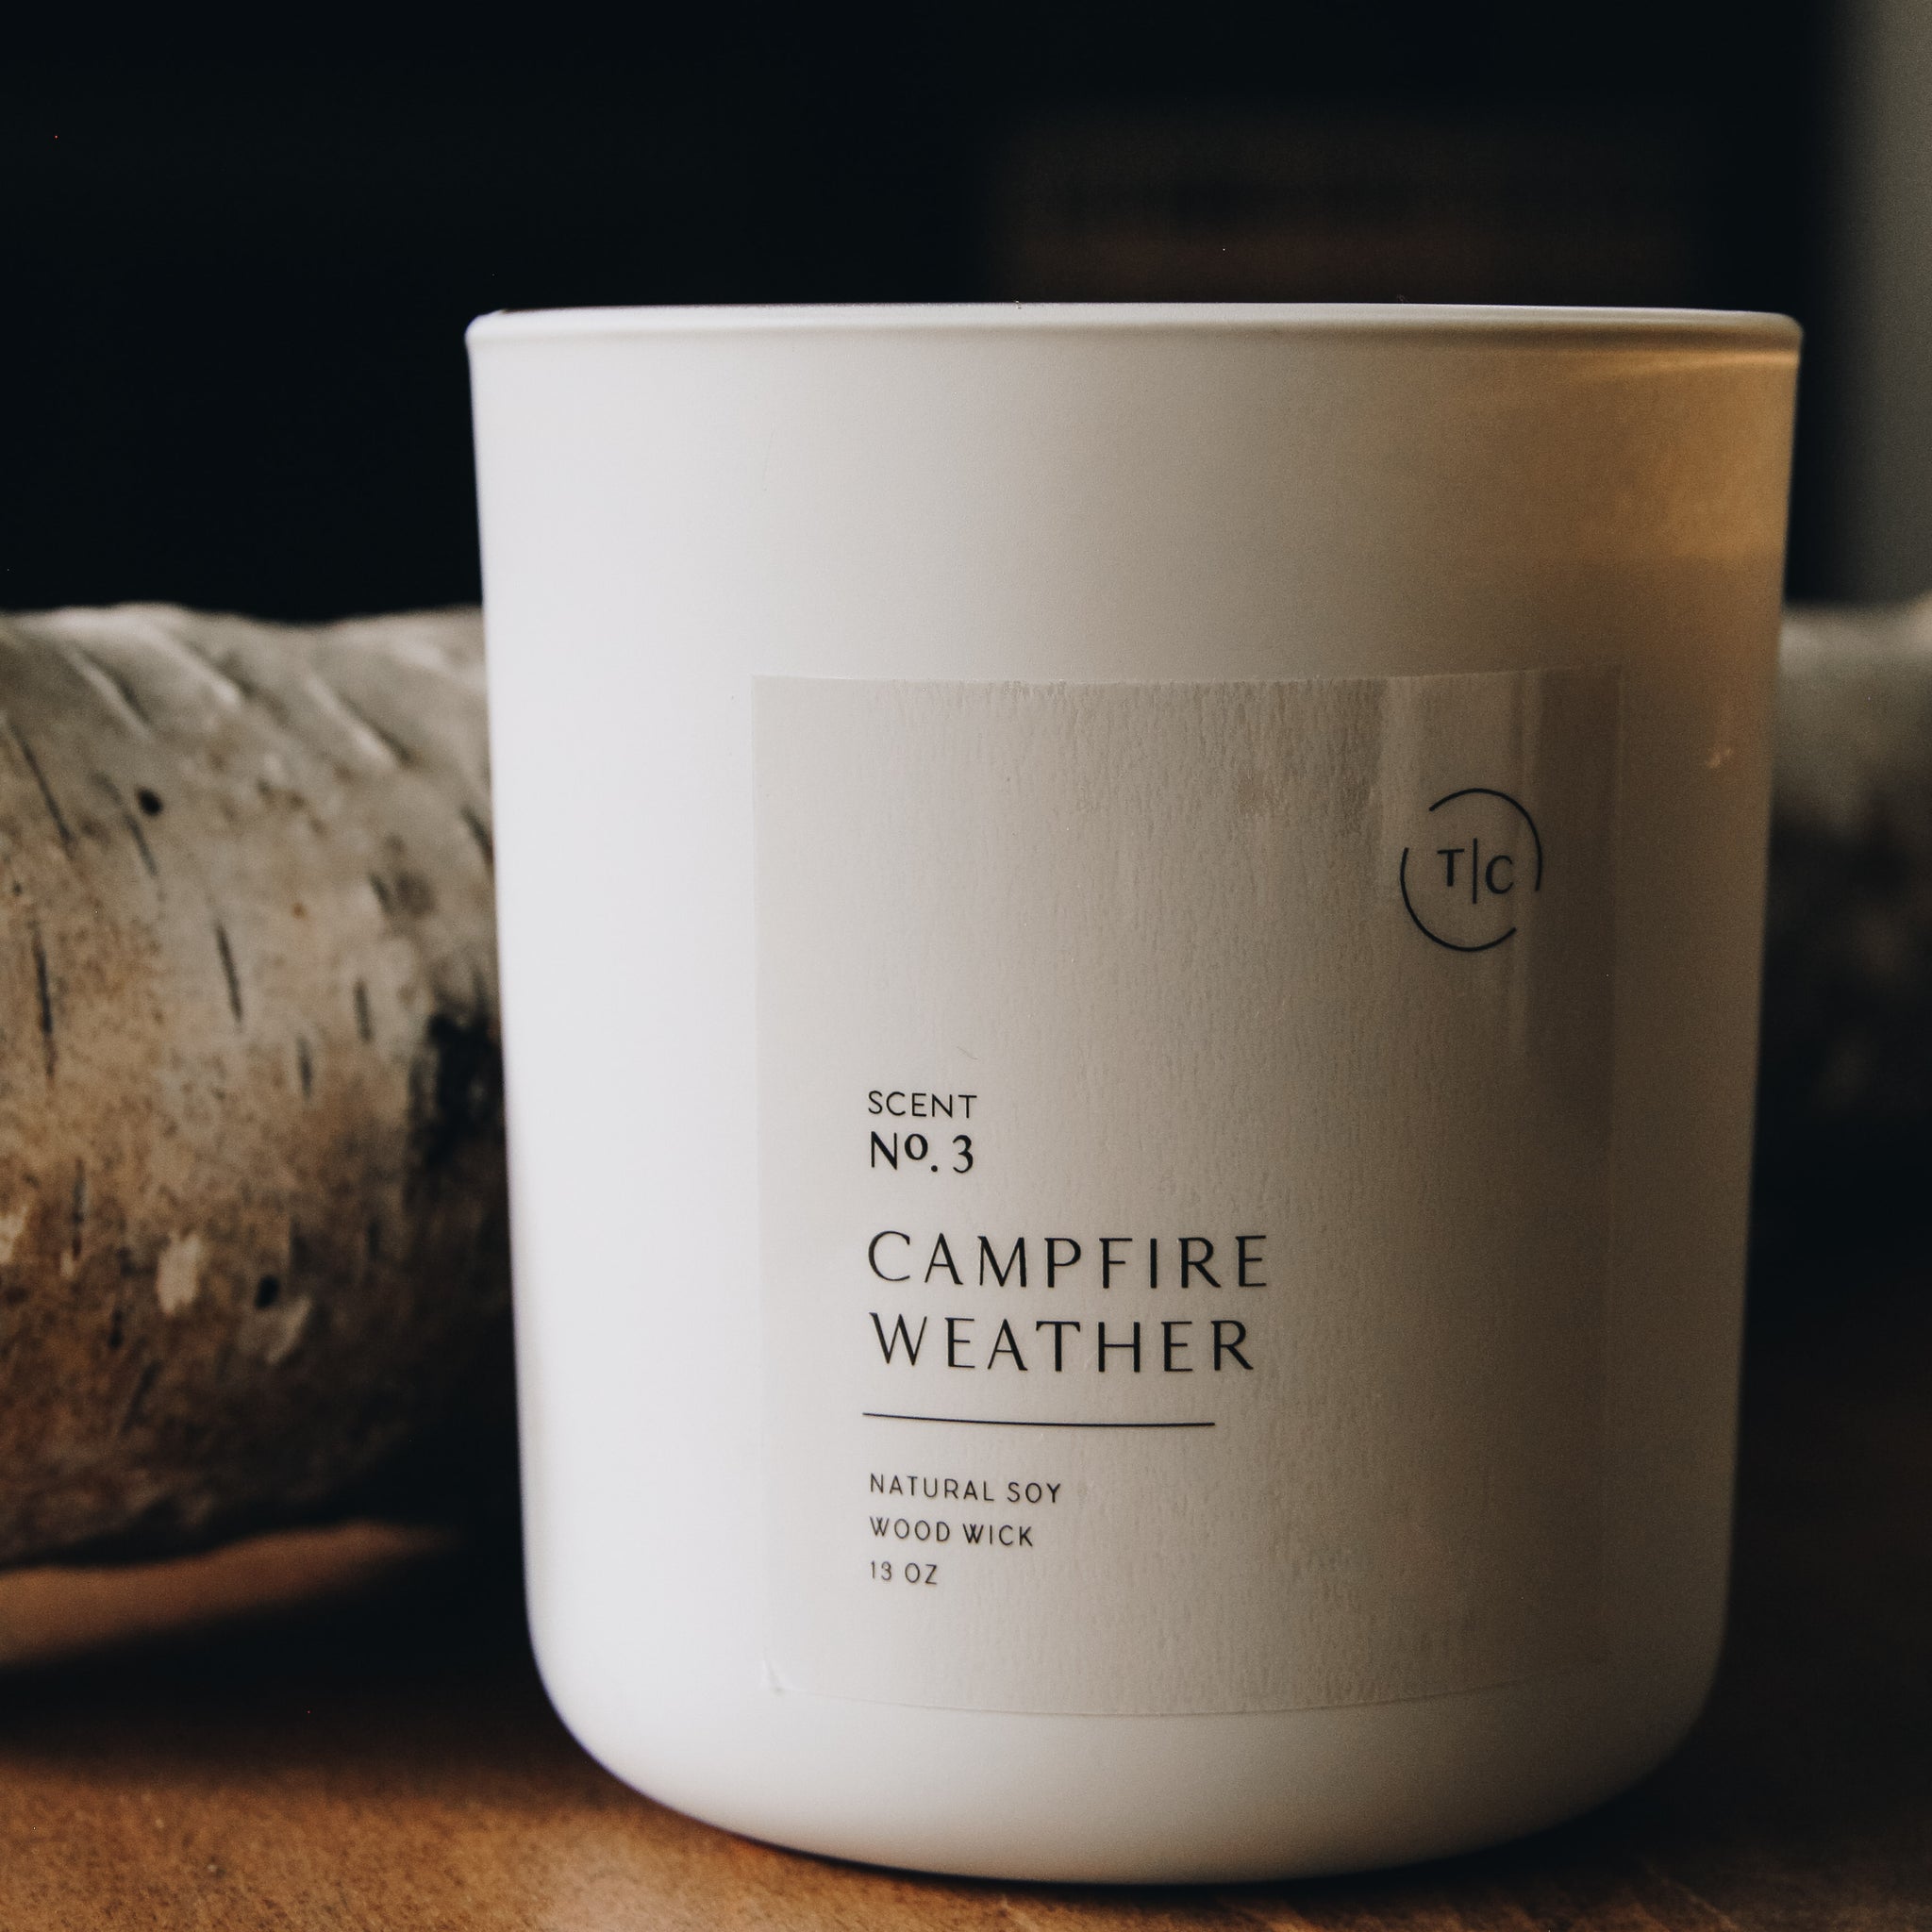 The Chandlerie's Campfire Weather  - a soy wax, wood wick candle in cream glass vessel